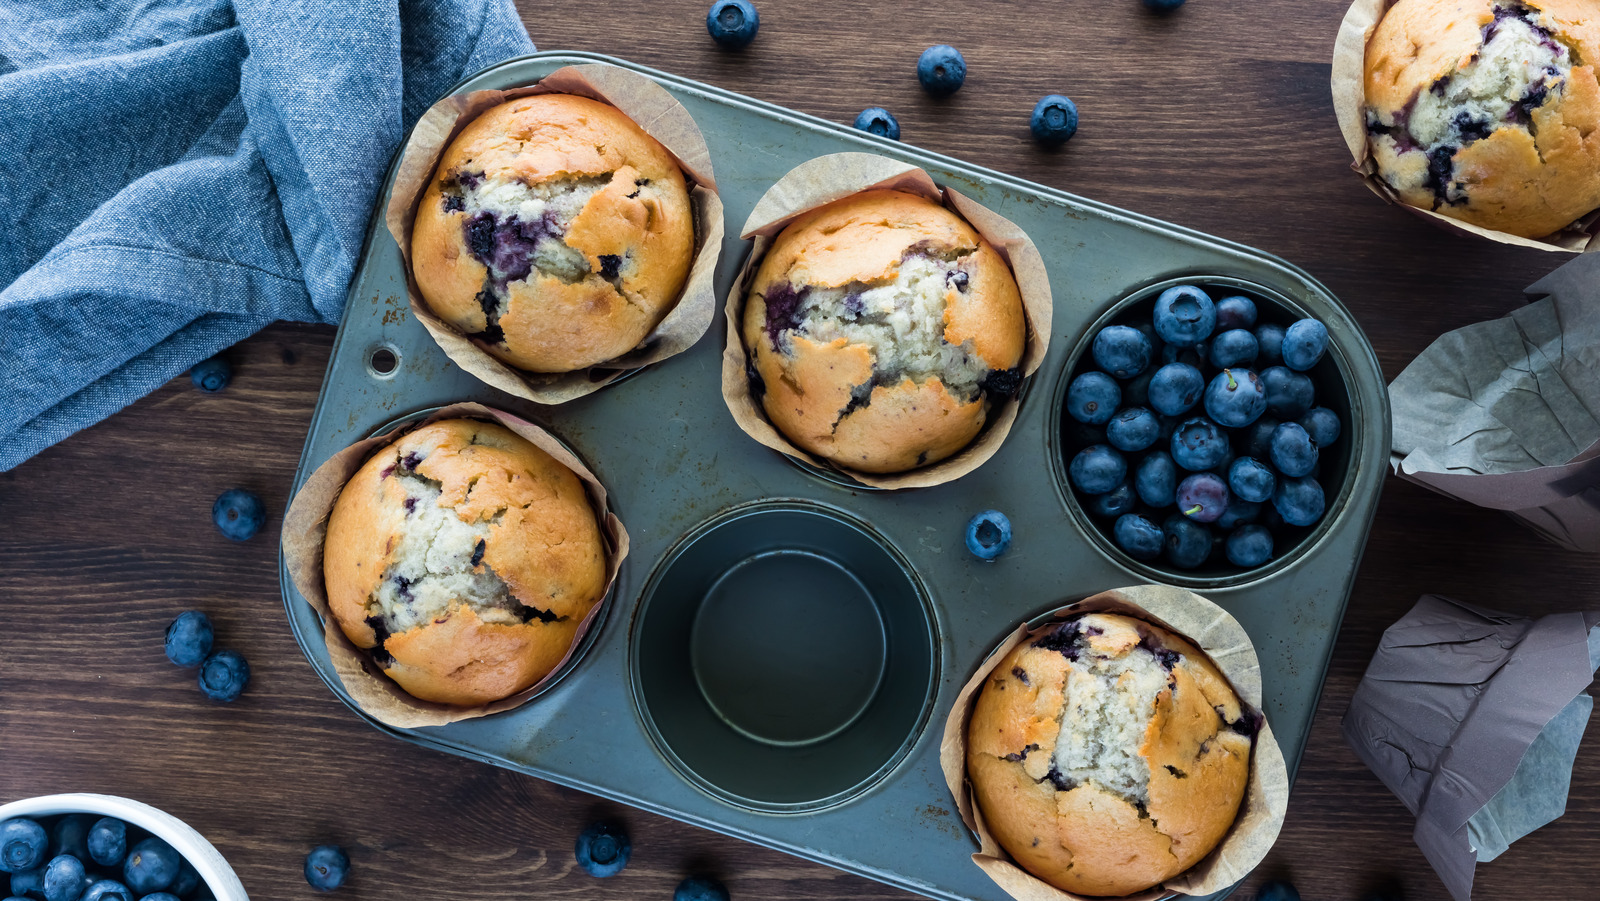 https://www.tastingtable.com/img/gallery/18-tips-for-making-the-absolute-best-muffins/l-intro-1682019913.jpg